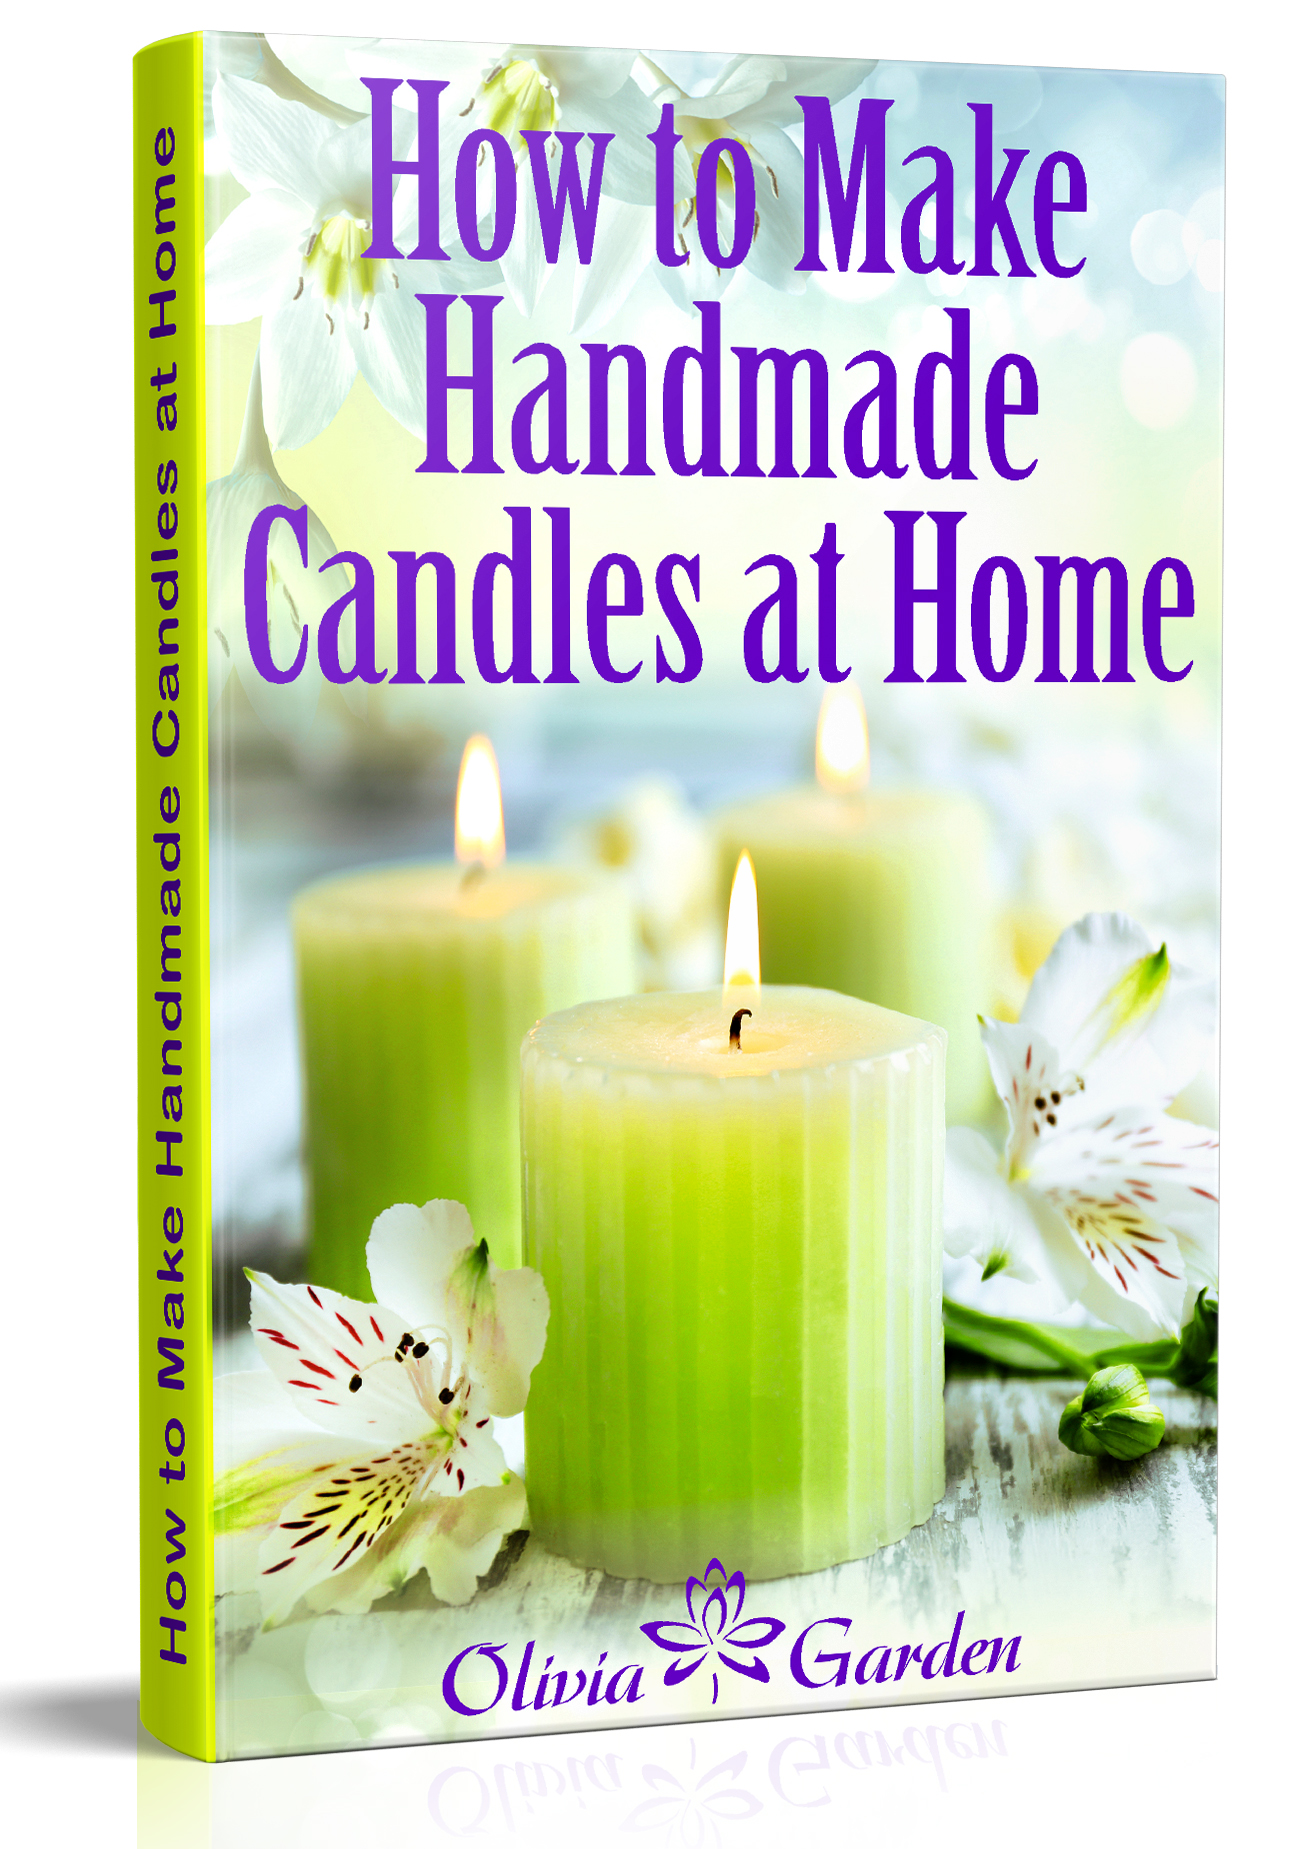 FREE: How to Make Handmade Candles at Home: Homemade Candles Book with Candles Recipes. Best Ideas About Candle Making and Candle Crafting (Hand Made Candles Recipes with Essential Oils, Scents, Wax and Beewax.) by Olivia Garden